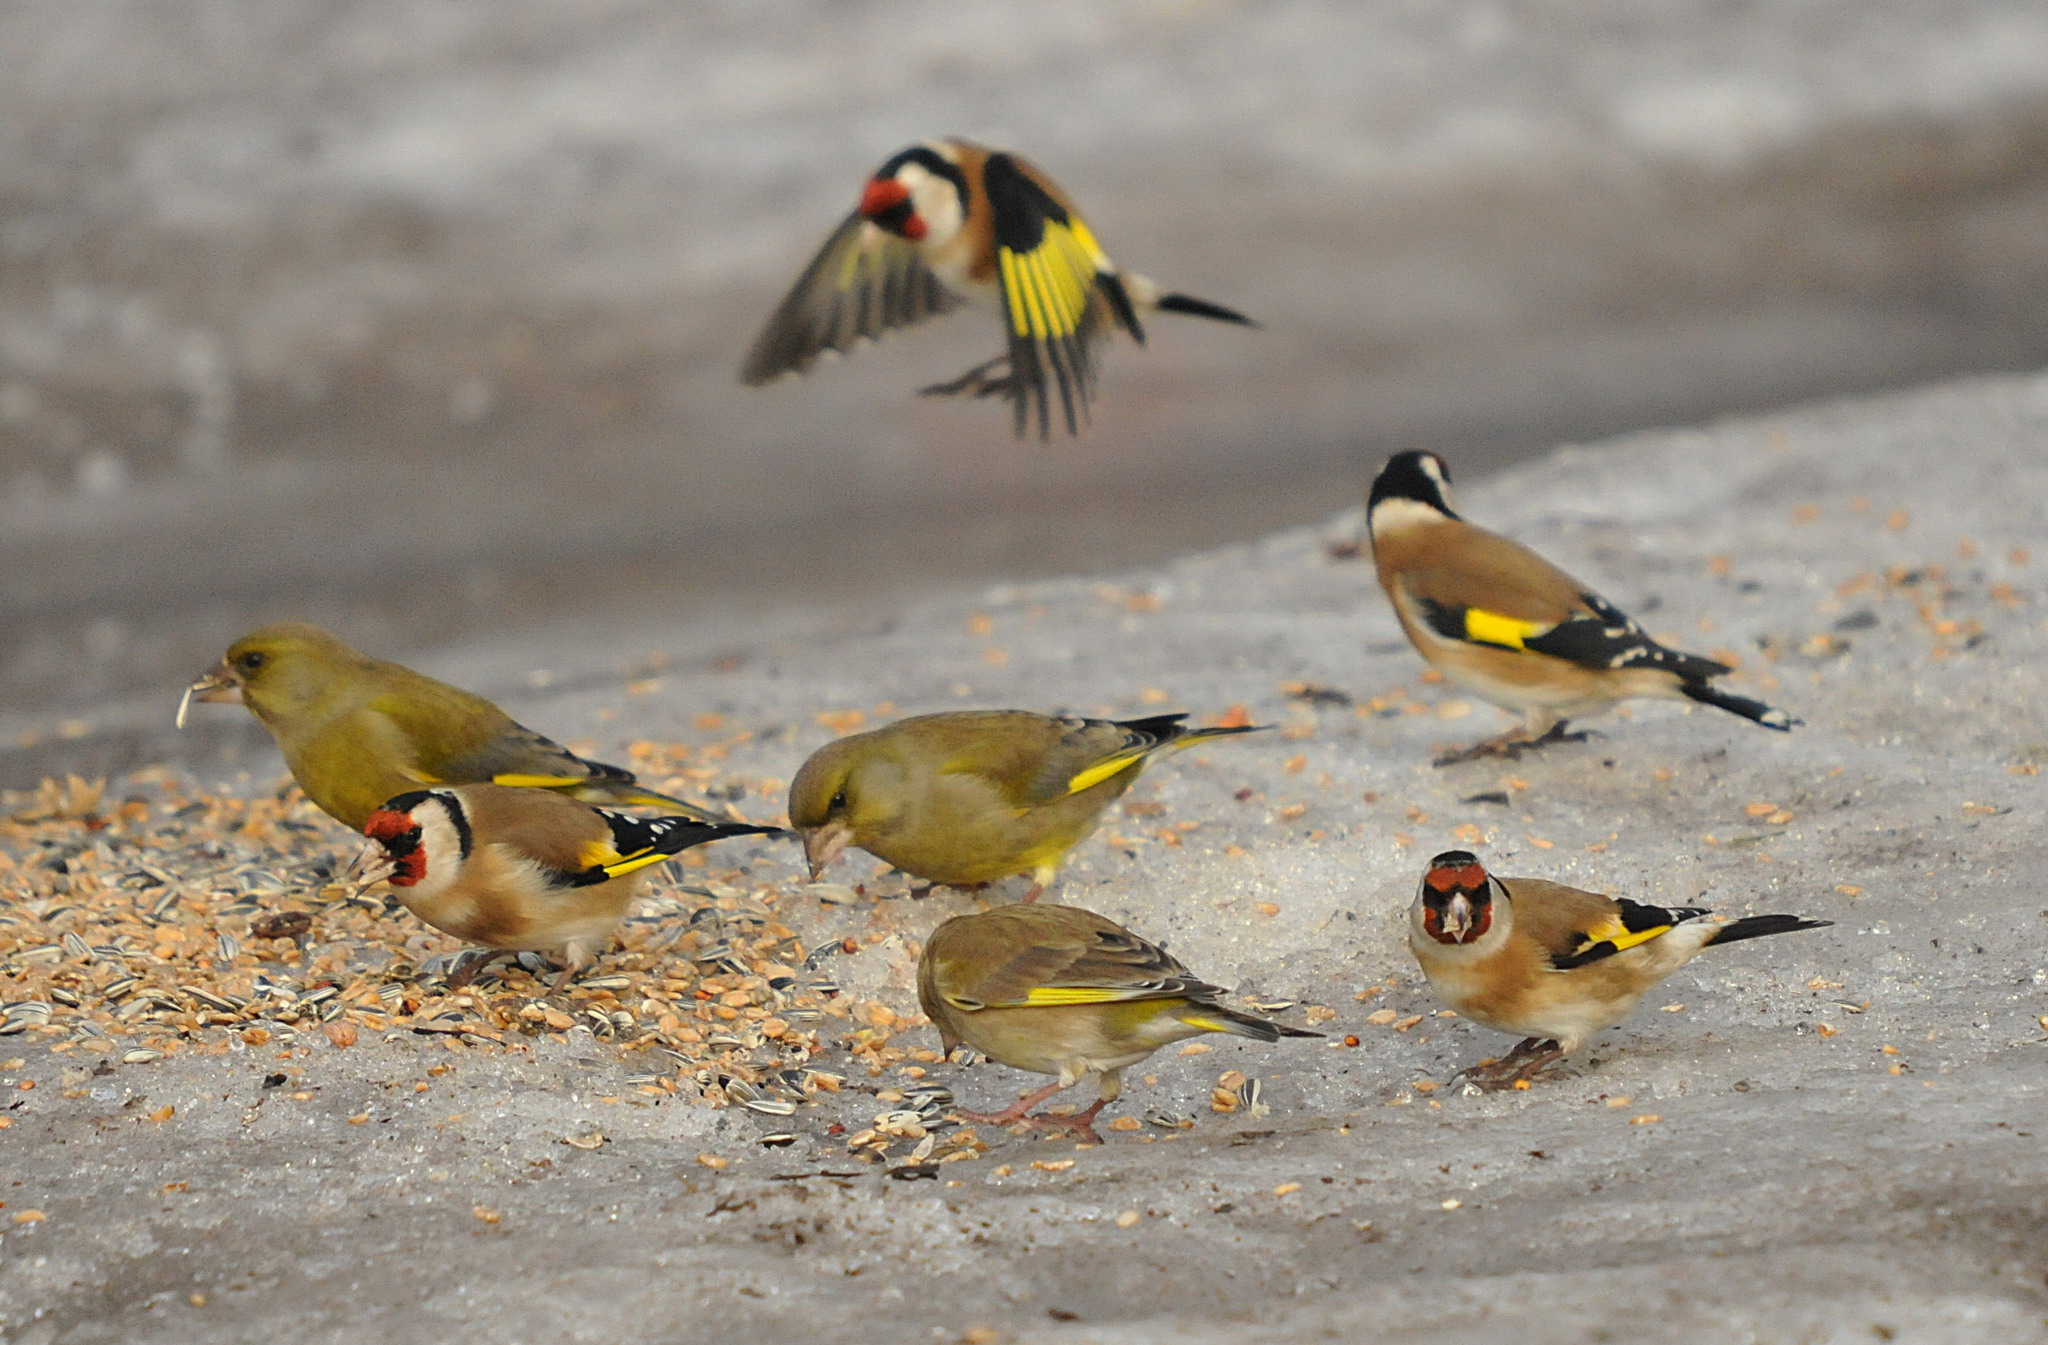 Goldfinches and greenfiches feeding on seed (baerchen57)